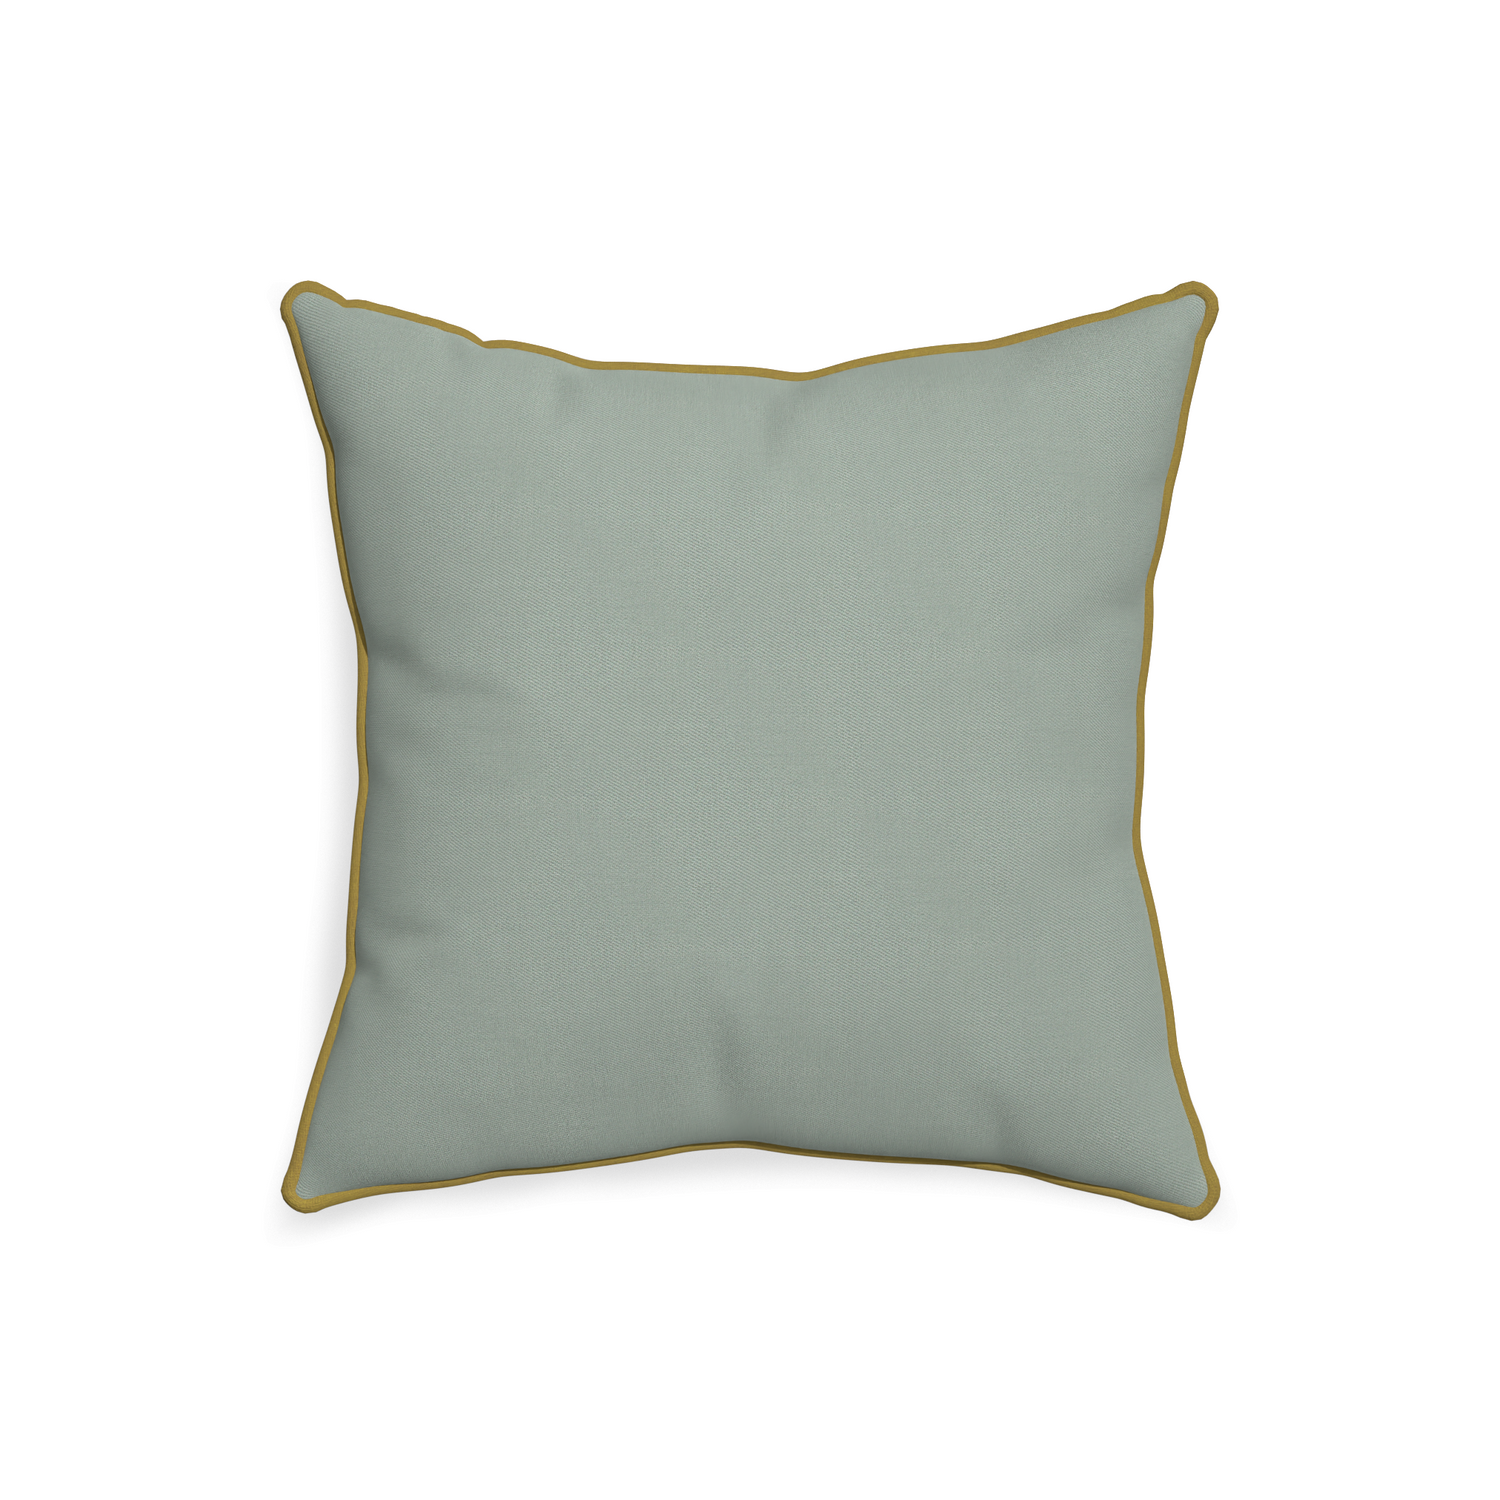 20-square sage custom sage green cottonpillow with c piping on white background